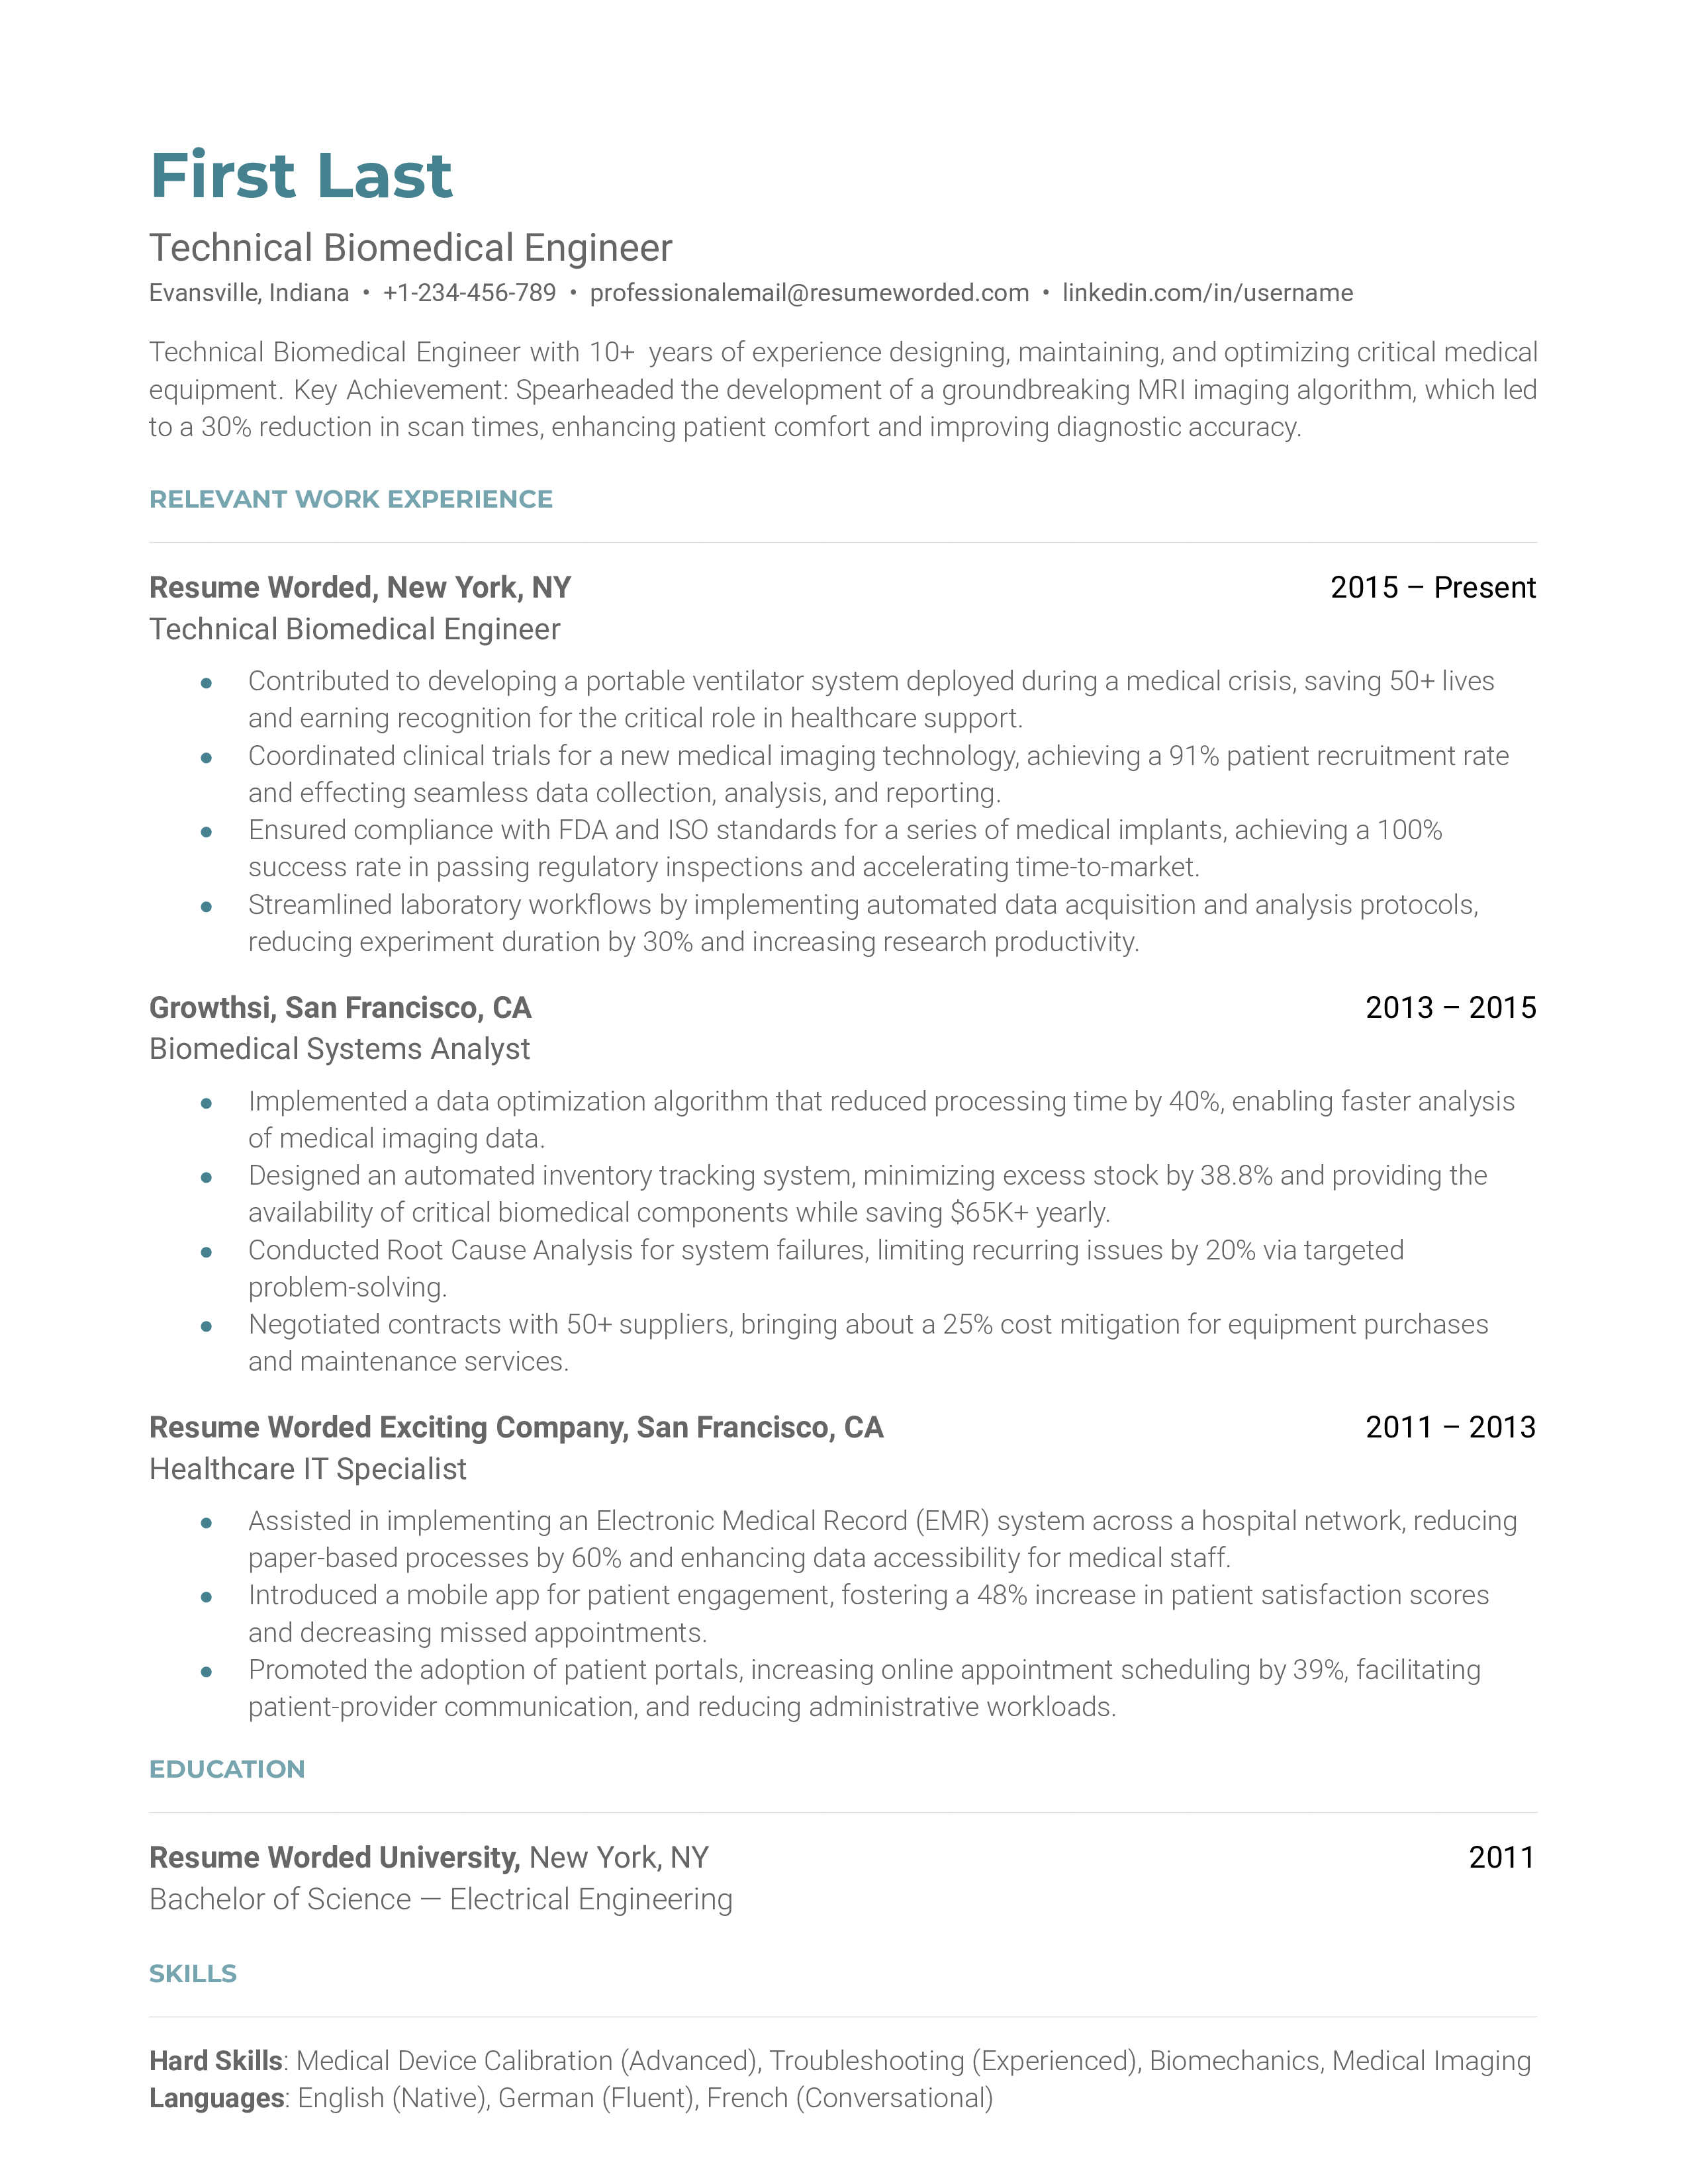 Technical Biomedical Engineer resume showcasing key projects and software proficiency.